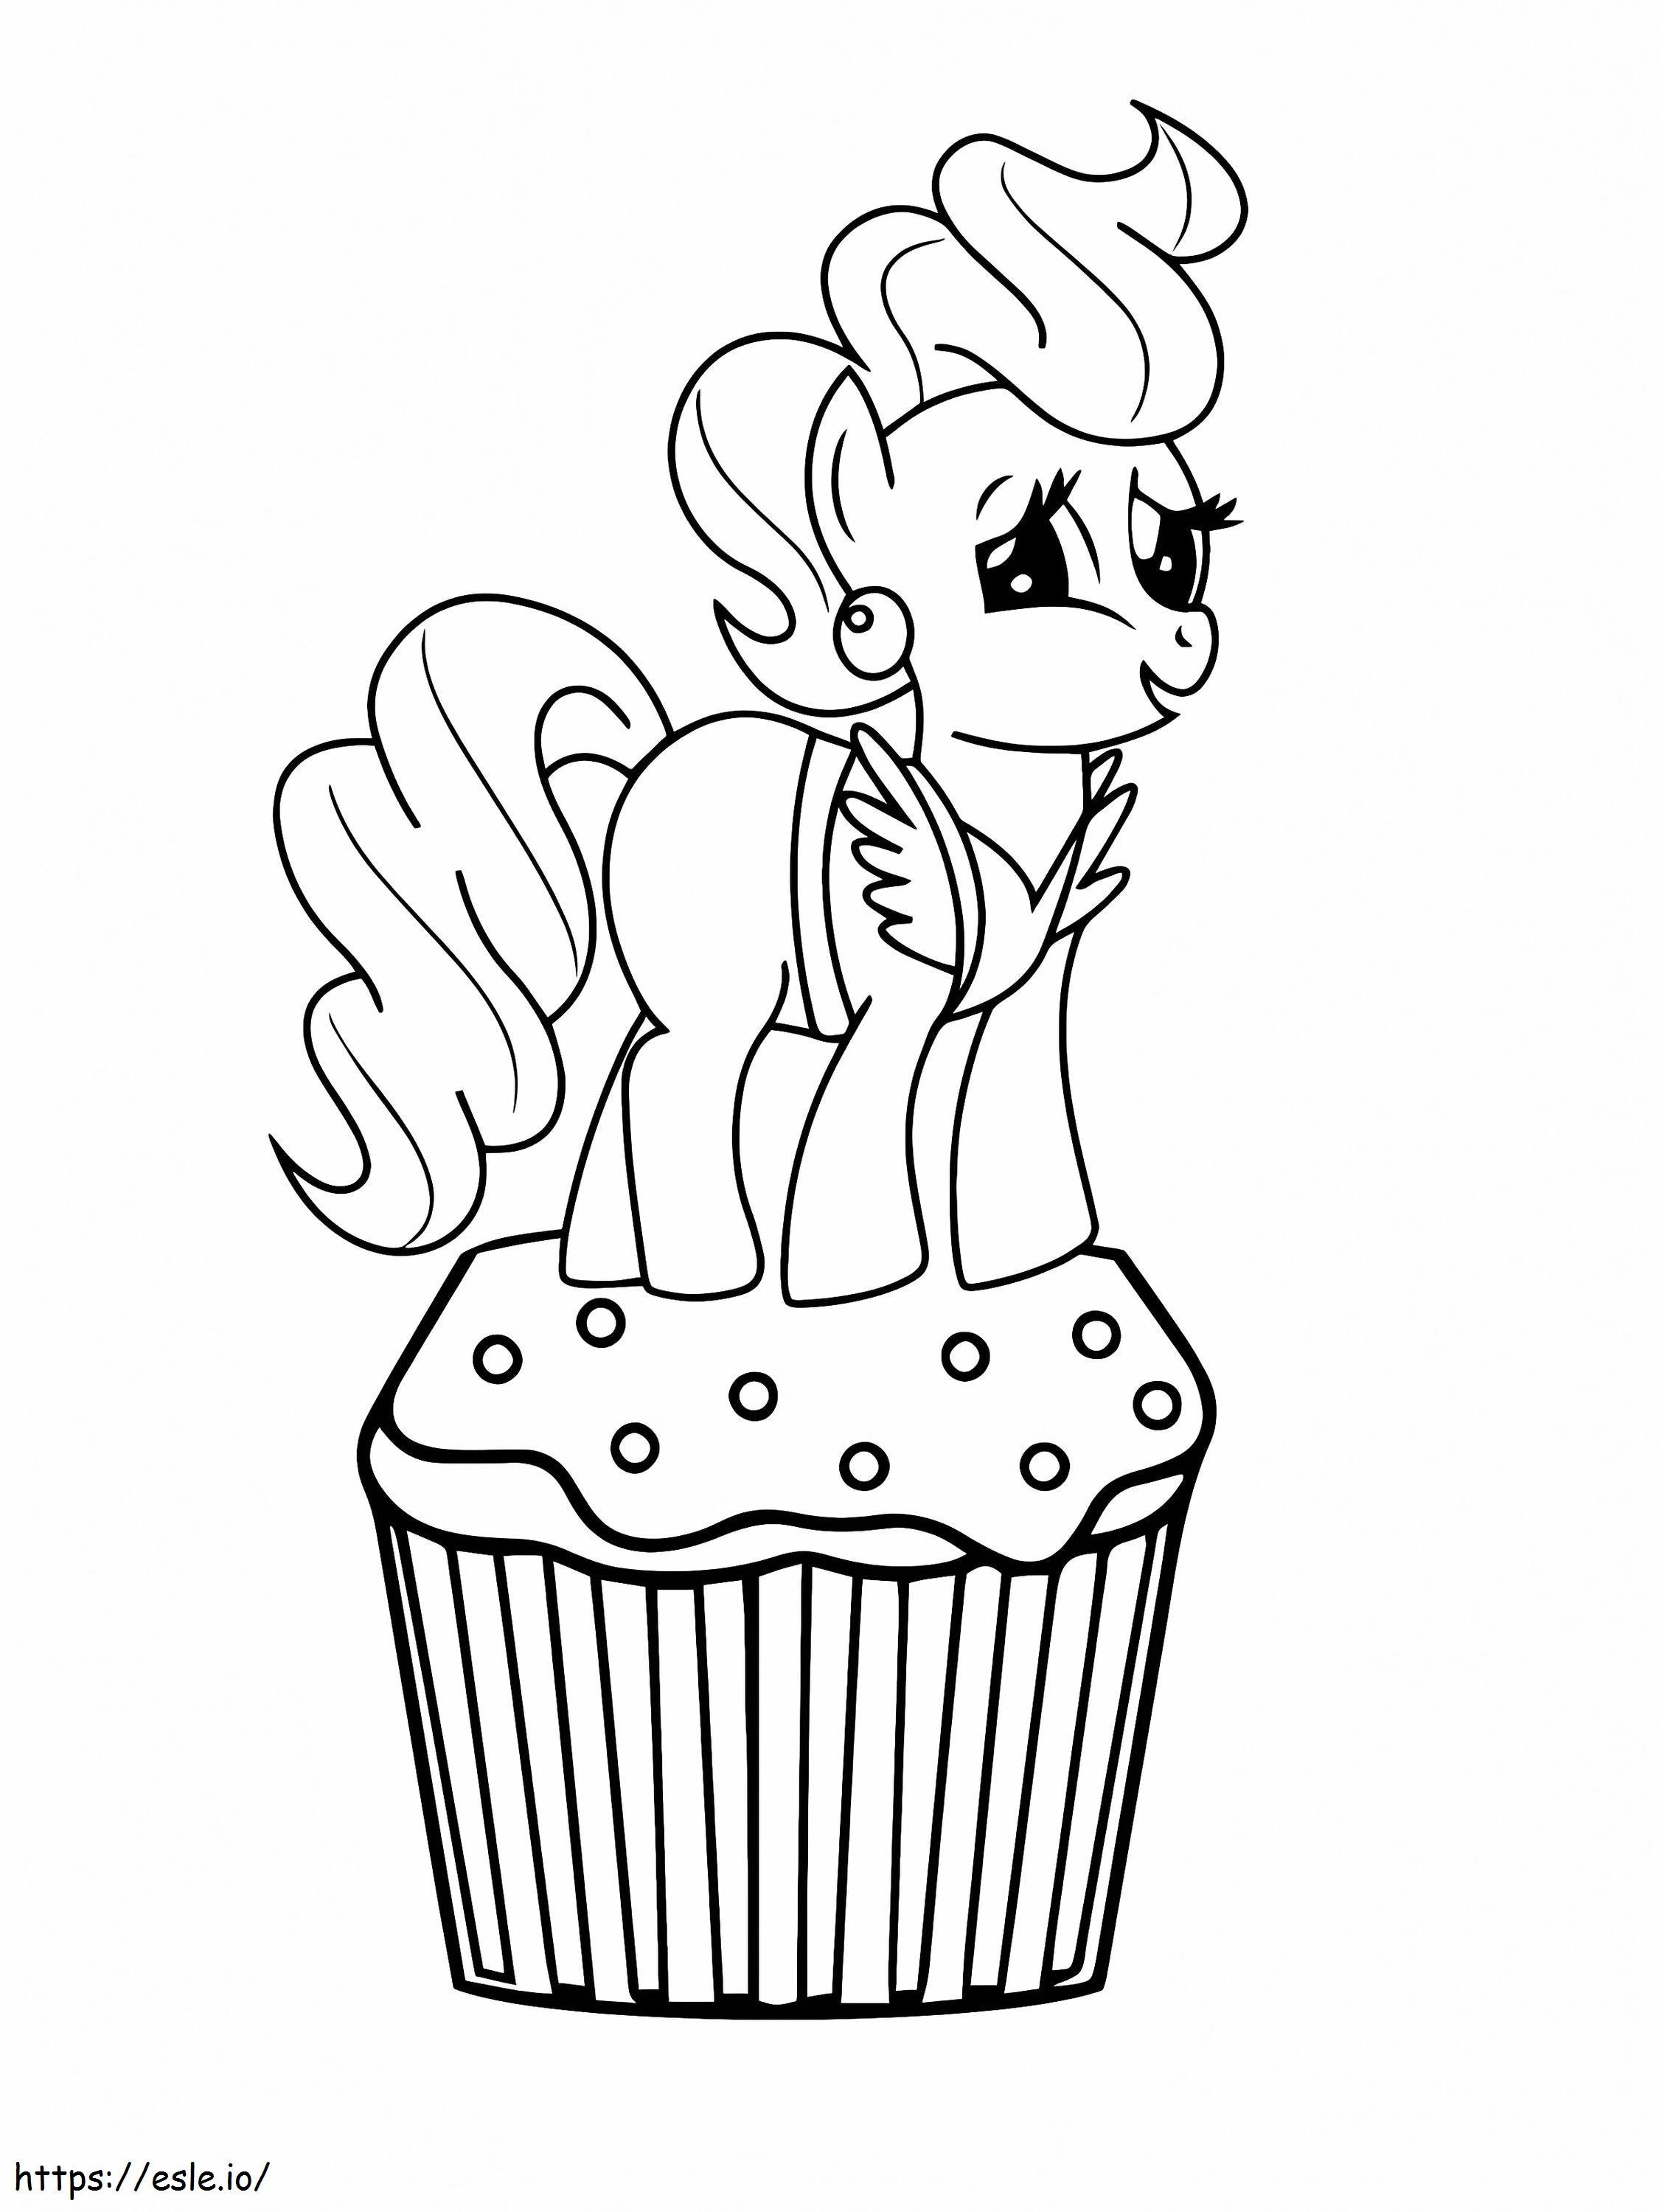 Mrs Cake On The Top Of Cupcake In My Little Pony coloring page